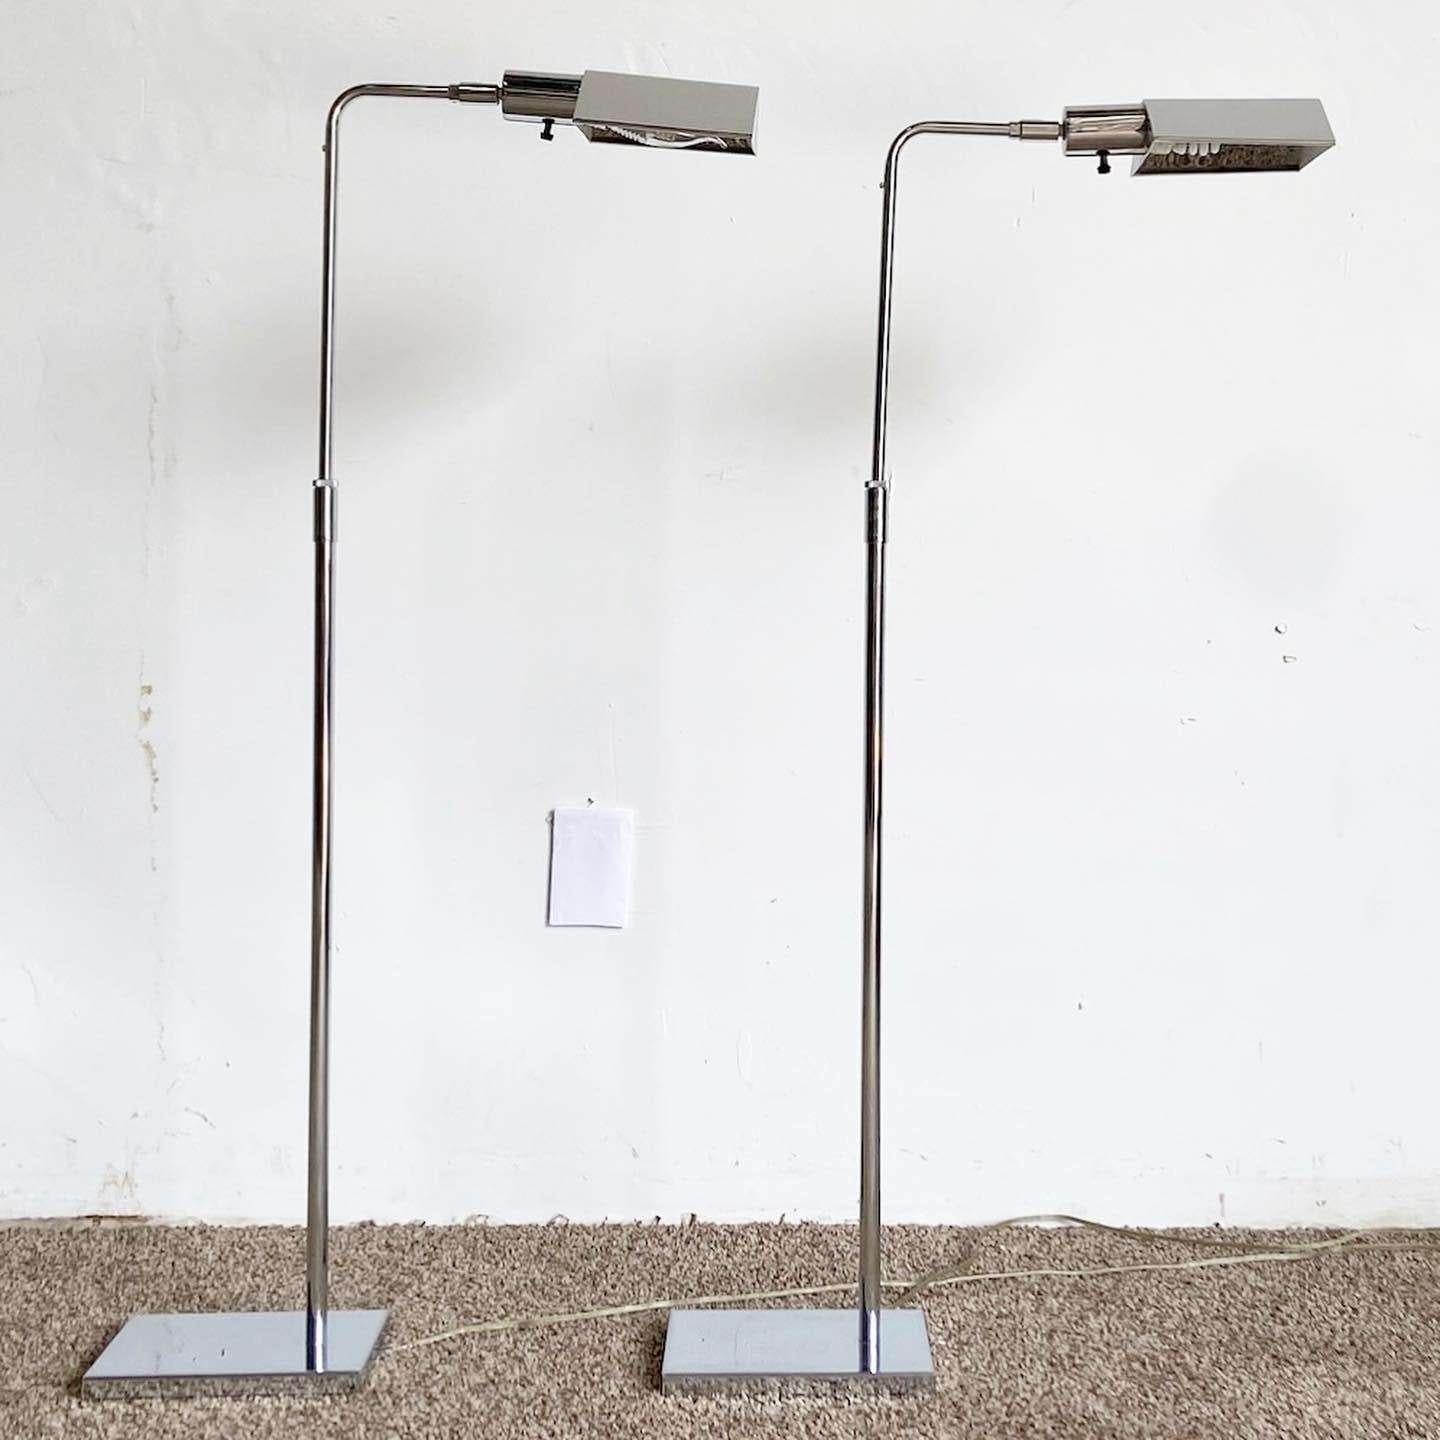 Late 20th Century Mid Century Modern Chrome Pharmacists Floor Lamps - a Pair For Sale